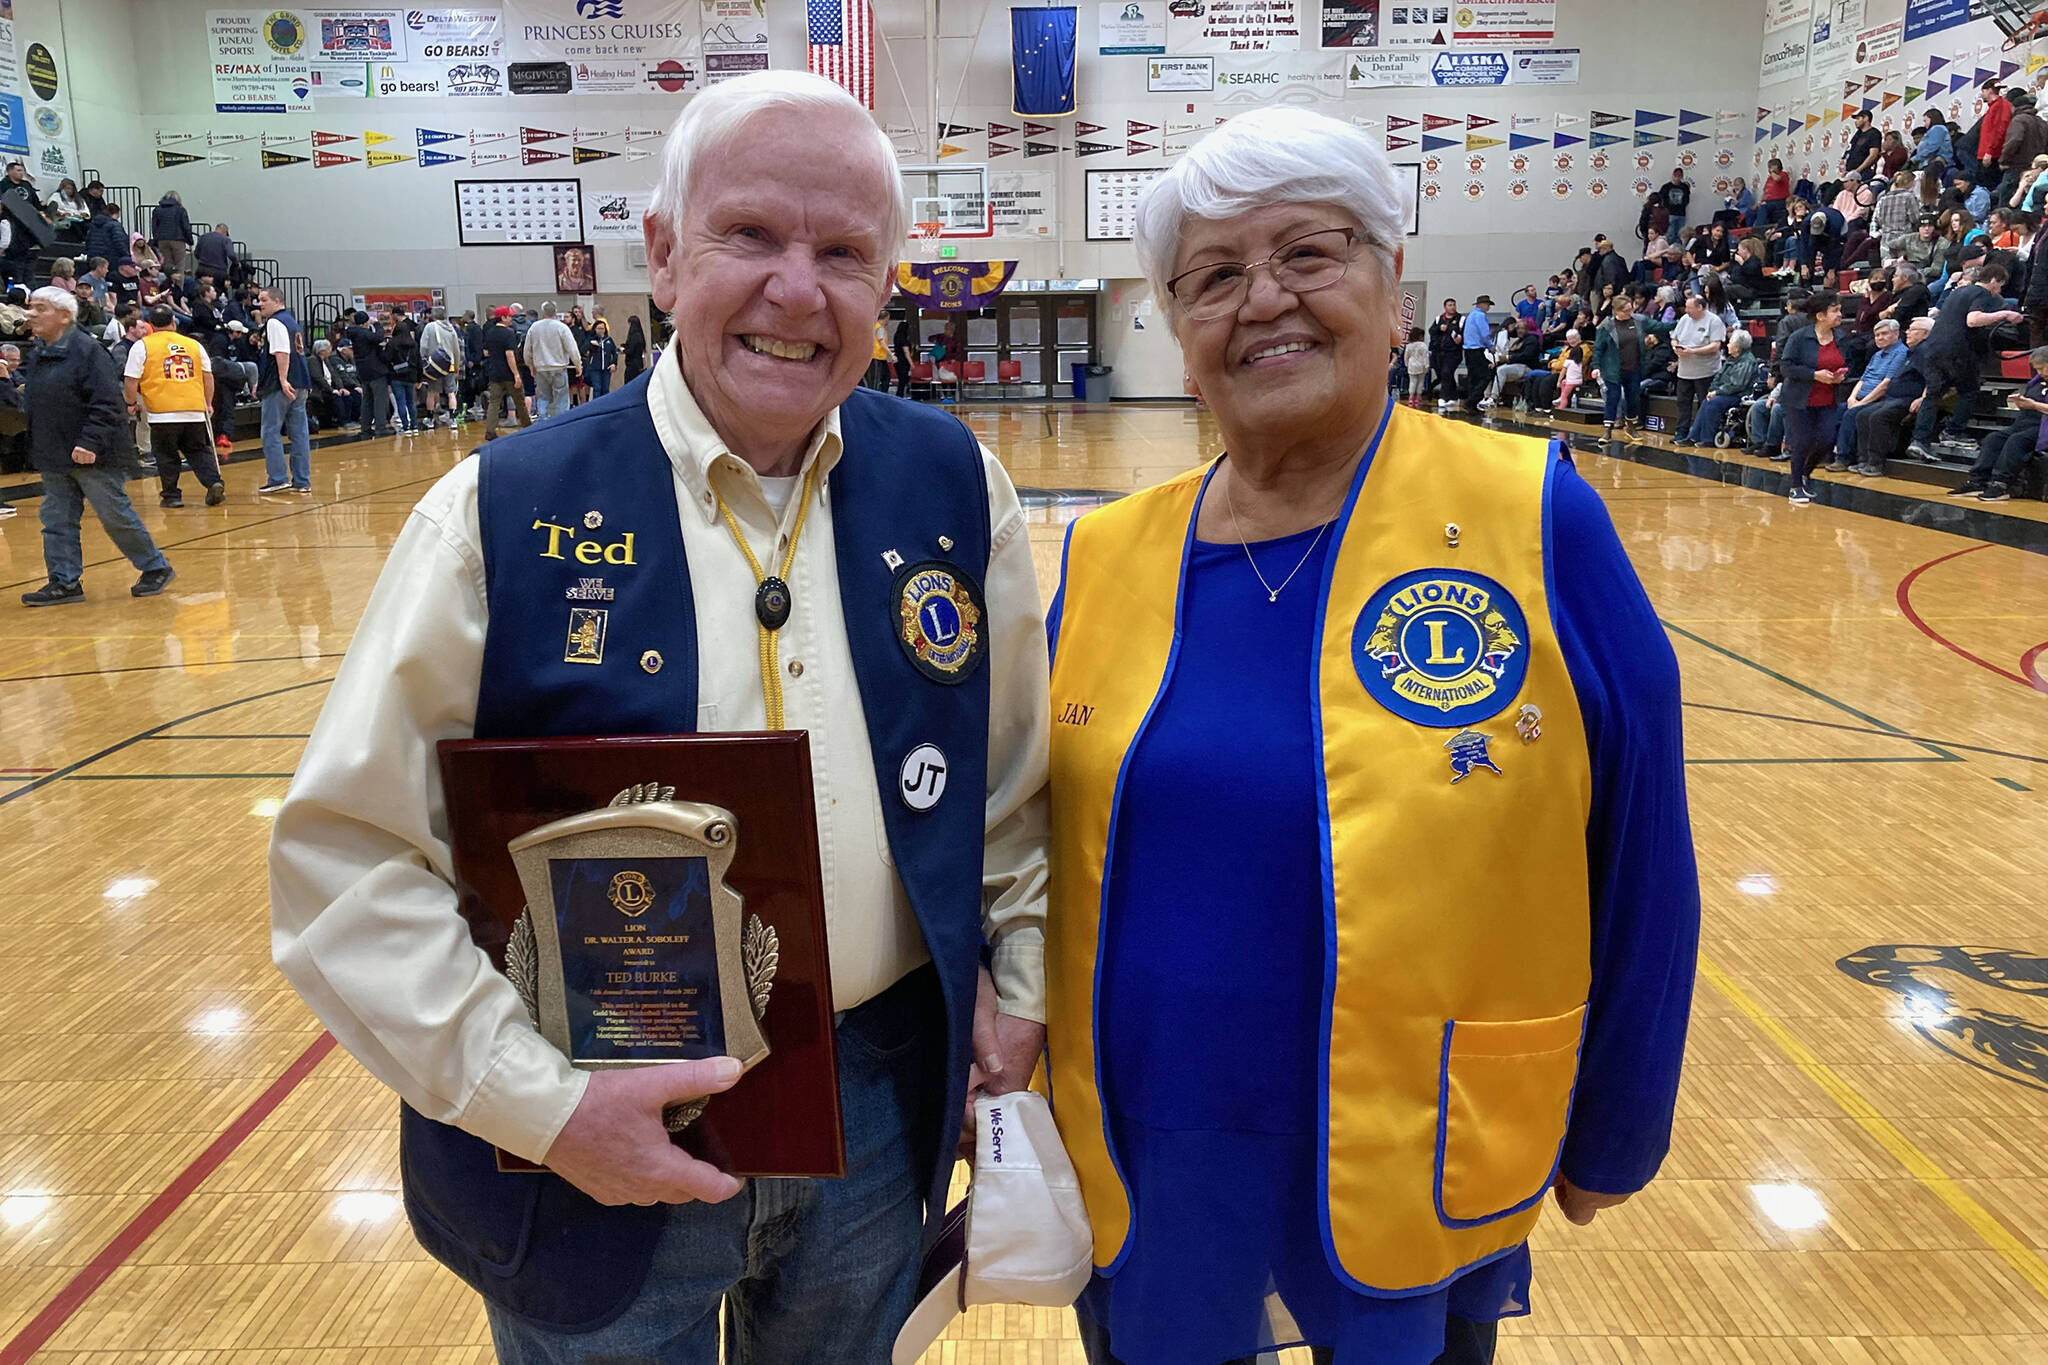 Ted Burke and wife Jan at the Gold Medal Basketball Tournament on Saturday. Burke was the recipient of the Dr. Walter Soboleff Award. (Klas Stolpe/For the Juneau Empire)